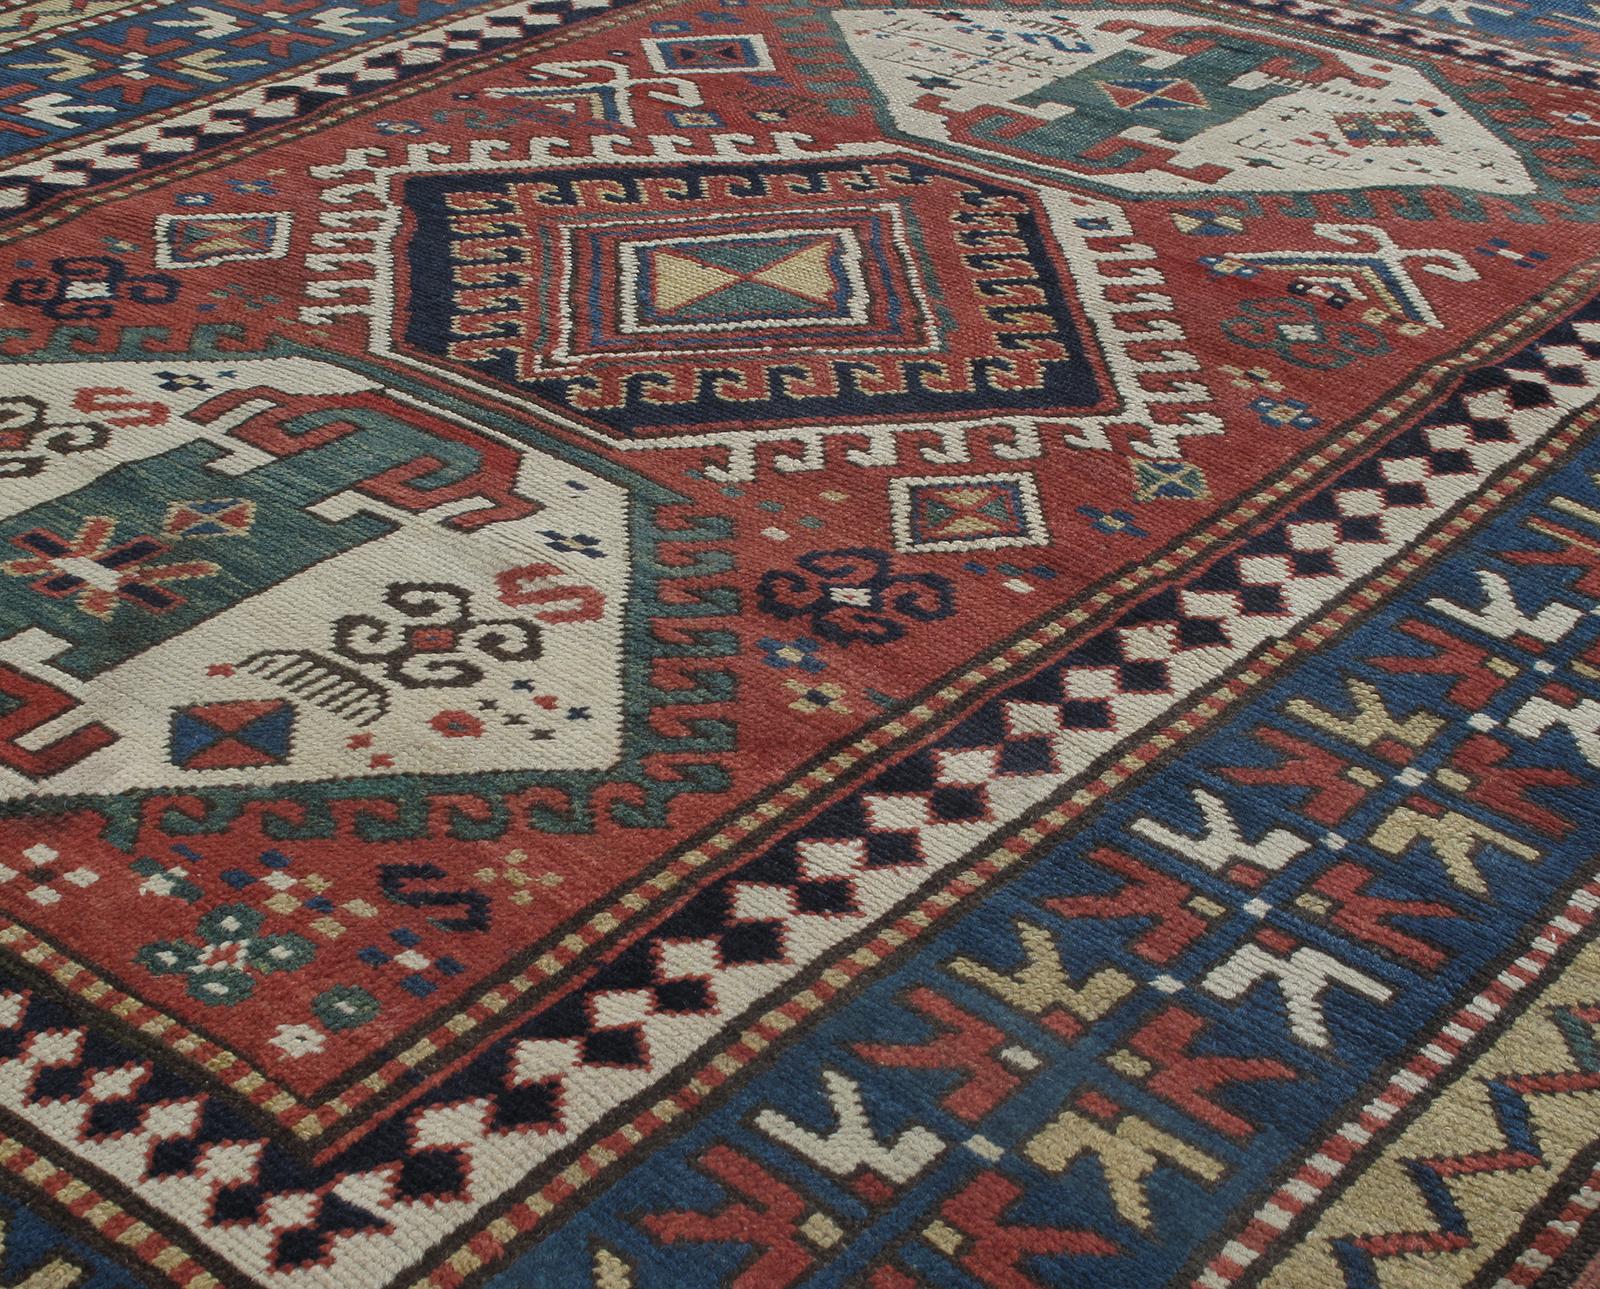 This antique Caucasian Kazak design tribal rug is from Azerbaijan, a country located in the south Caucasus region. It is constructed of 100% handspun wool and natural dyes. This rug features a bold, articulated geometric pattern, which is a very